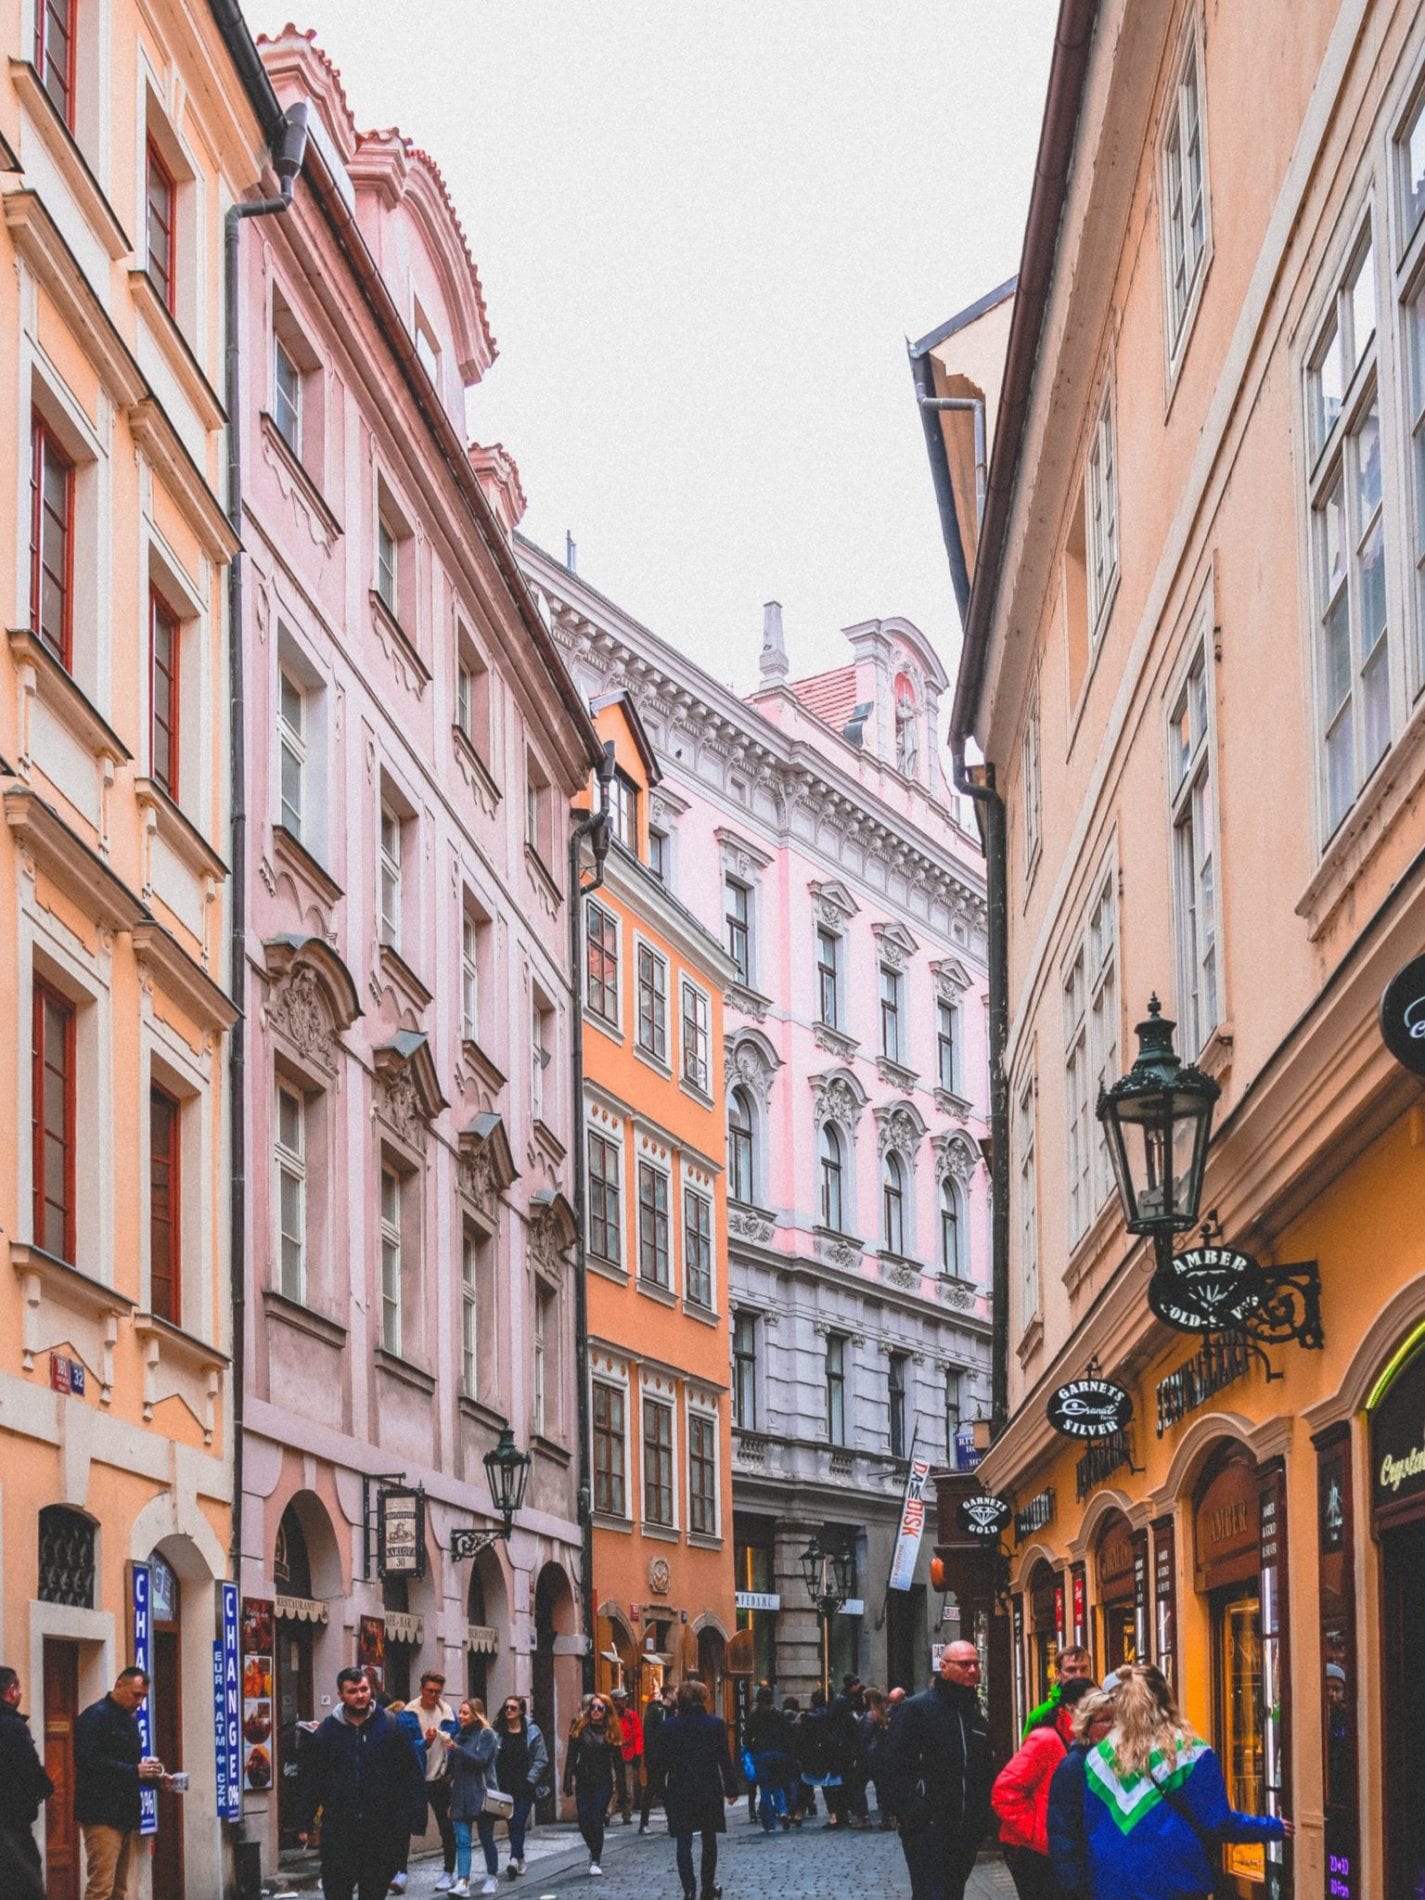 10 things to do in prague